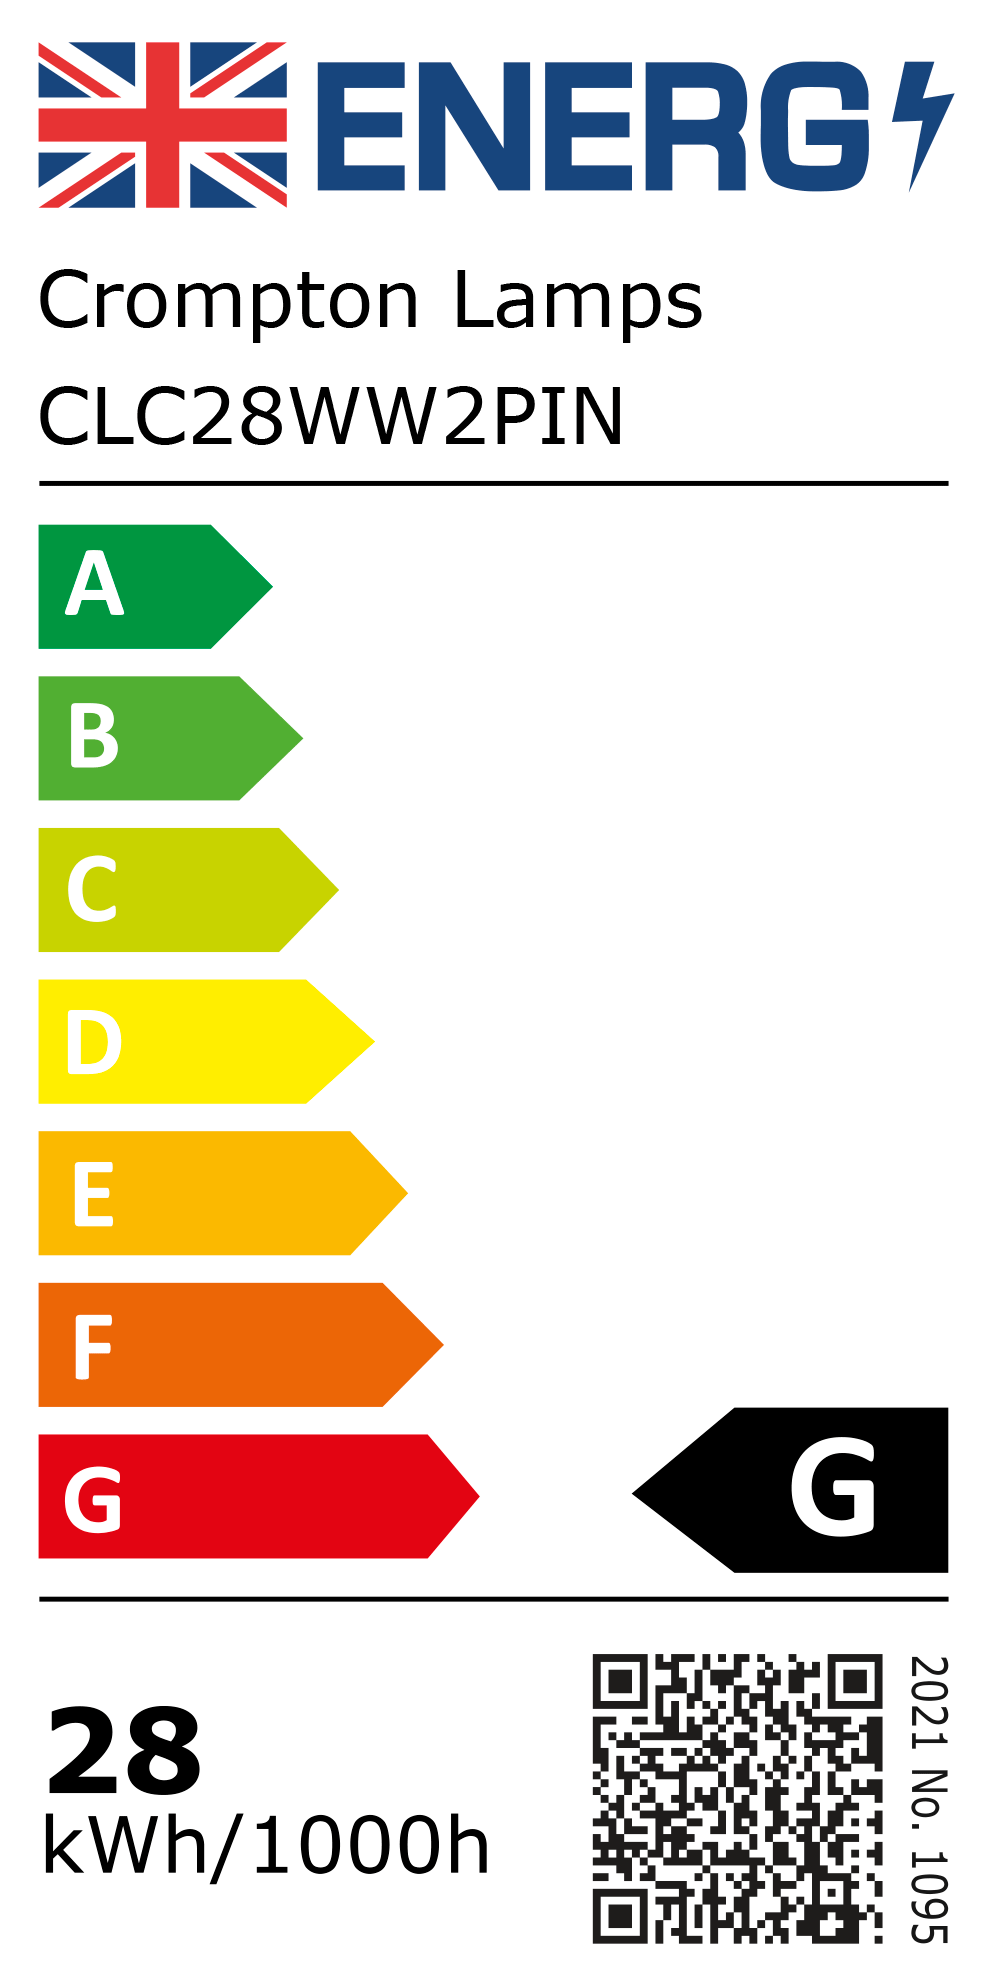 New 2021 Energy Rating Label: Stock Code CLC28WW2PIN